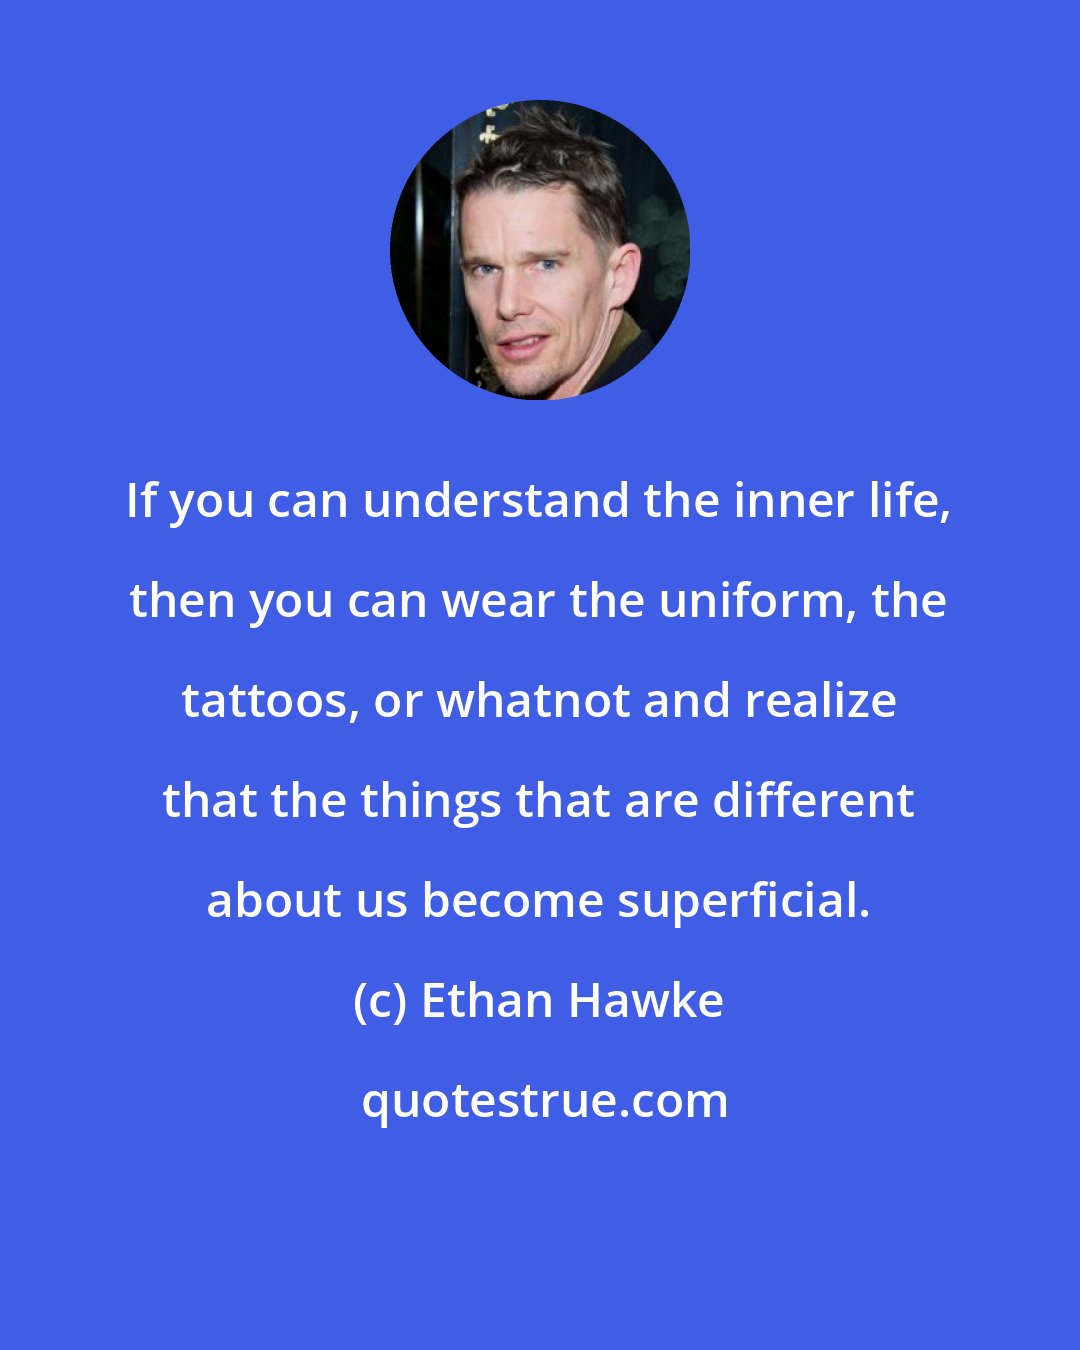 Ethan Hawke: If you can understand the inner life, then you can wear the uniform, the tattoos, or whatnot and realize that the things that are different about us become superficial.